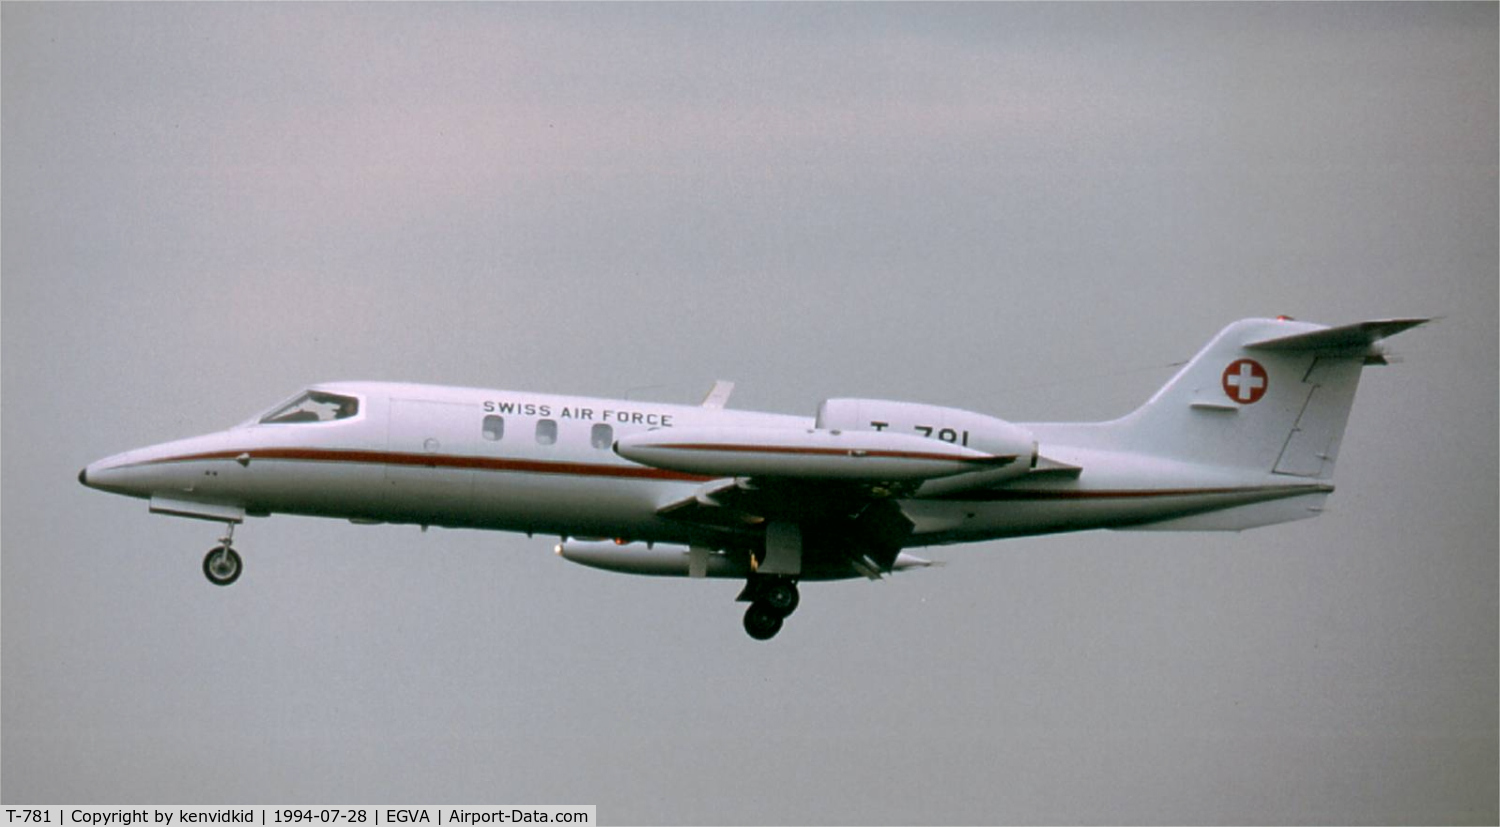 T-781, 1976 Learjet 35A C/N 35A-068, Swiss Air Force arriving at RIAT.